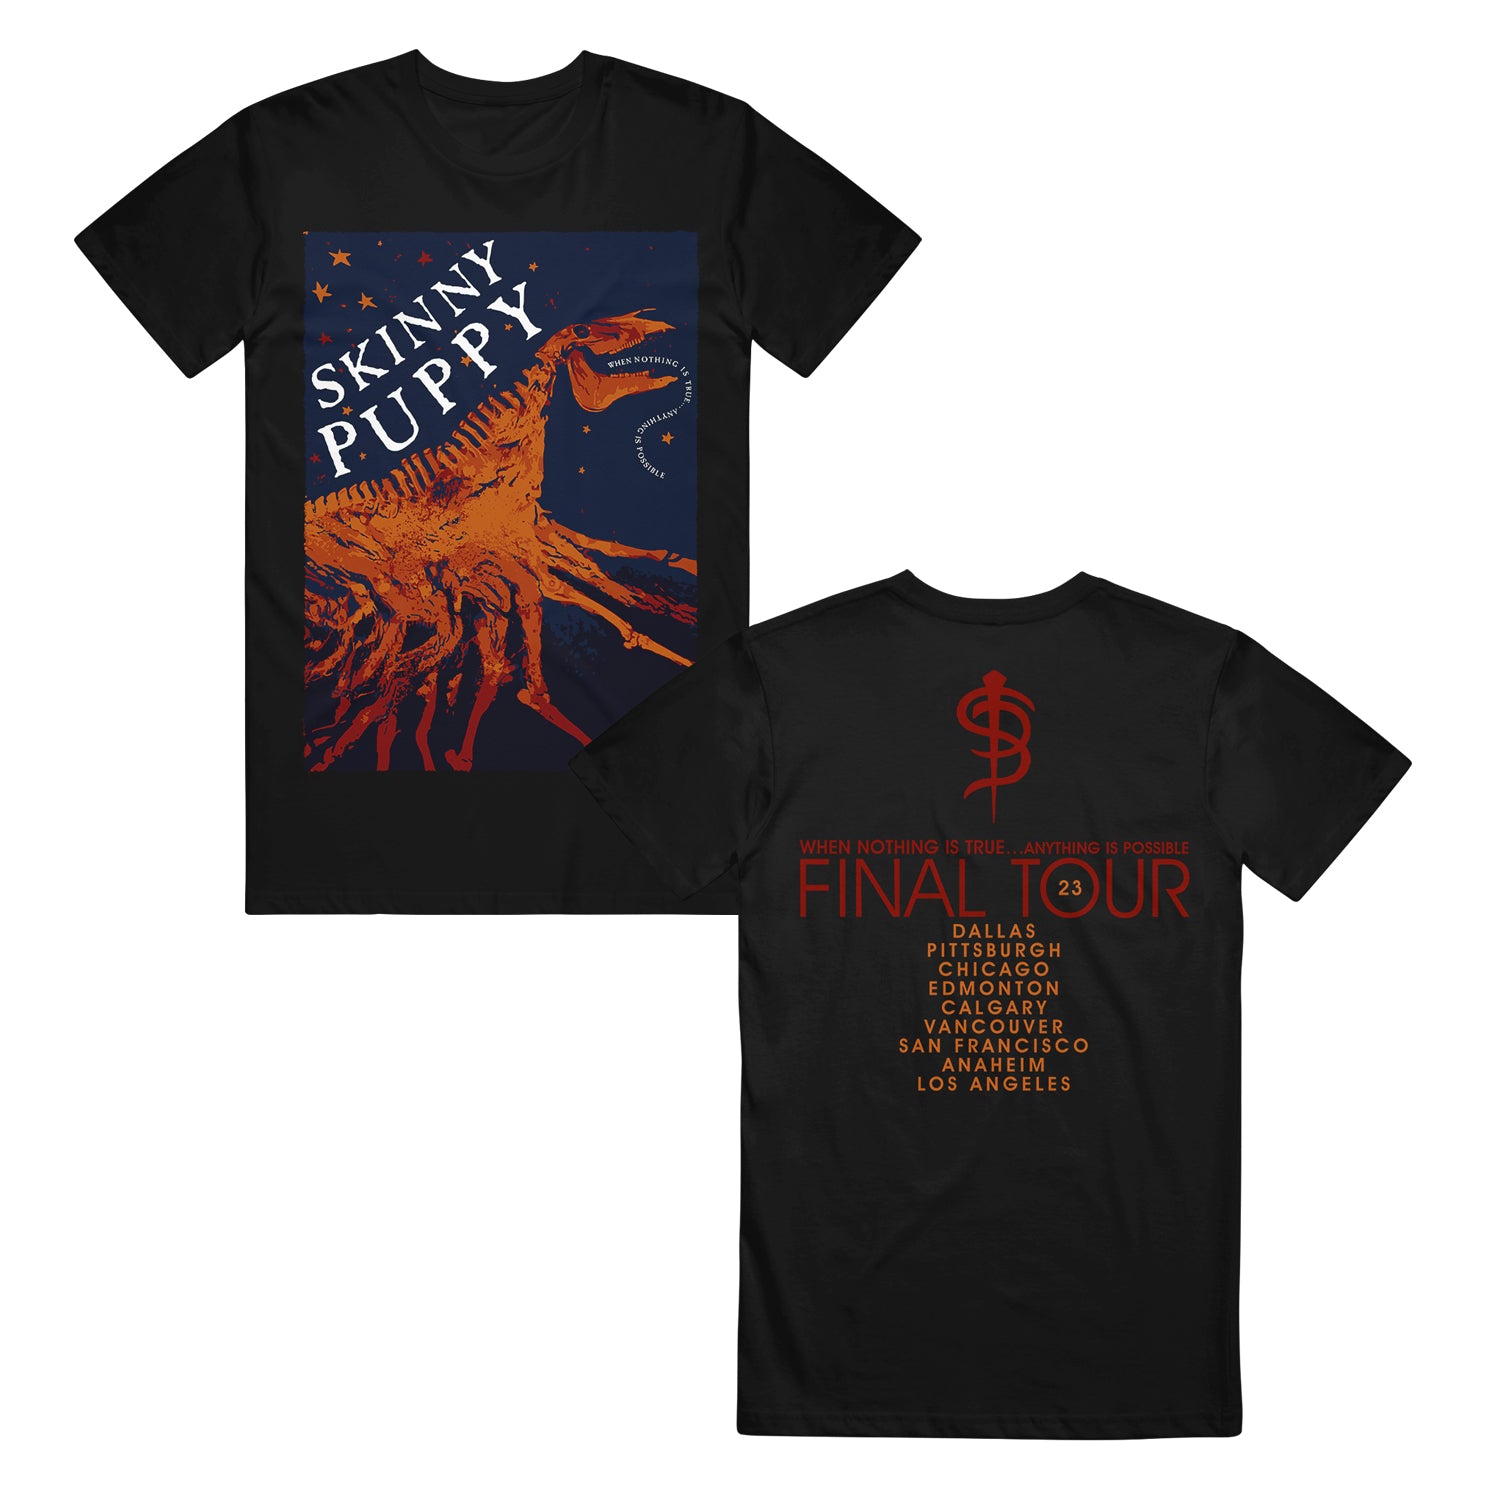 image of the front and back of a black tee shirt. front is on the left and has a full body print that says skinny puppy and then a dinosaur skeleton. back is on the right and has a full print of the final tour locations.